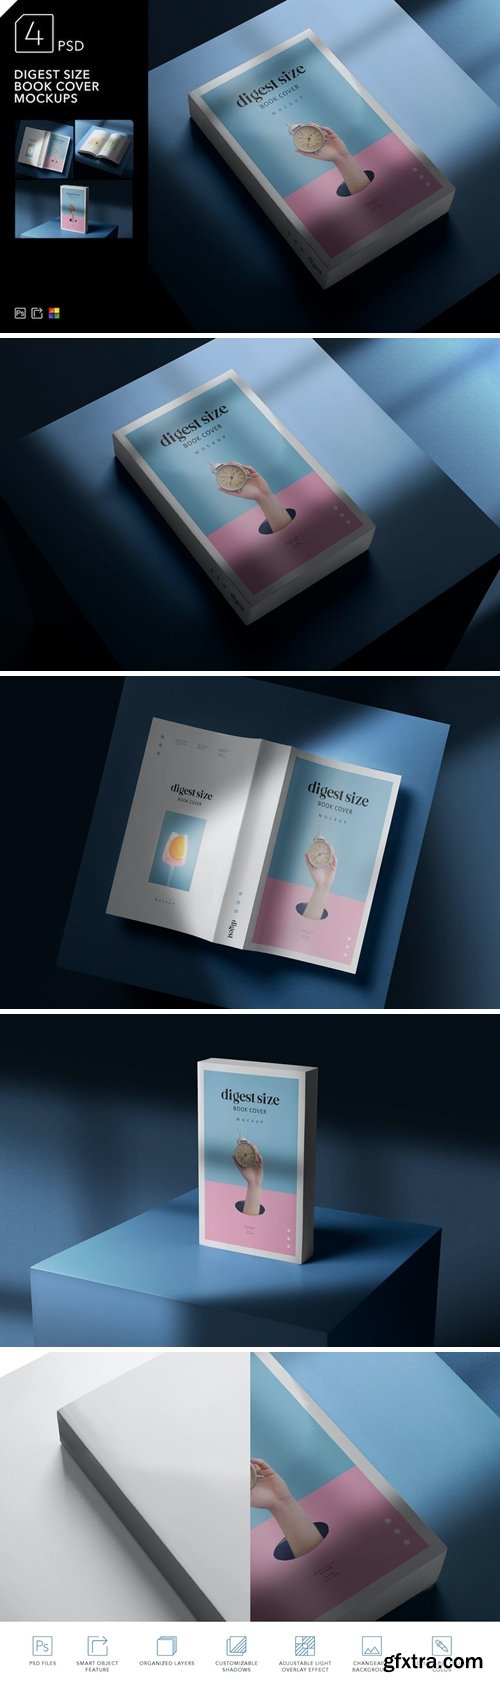 Digest Size Book Cover Mockups ZFNXPMG